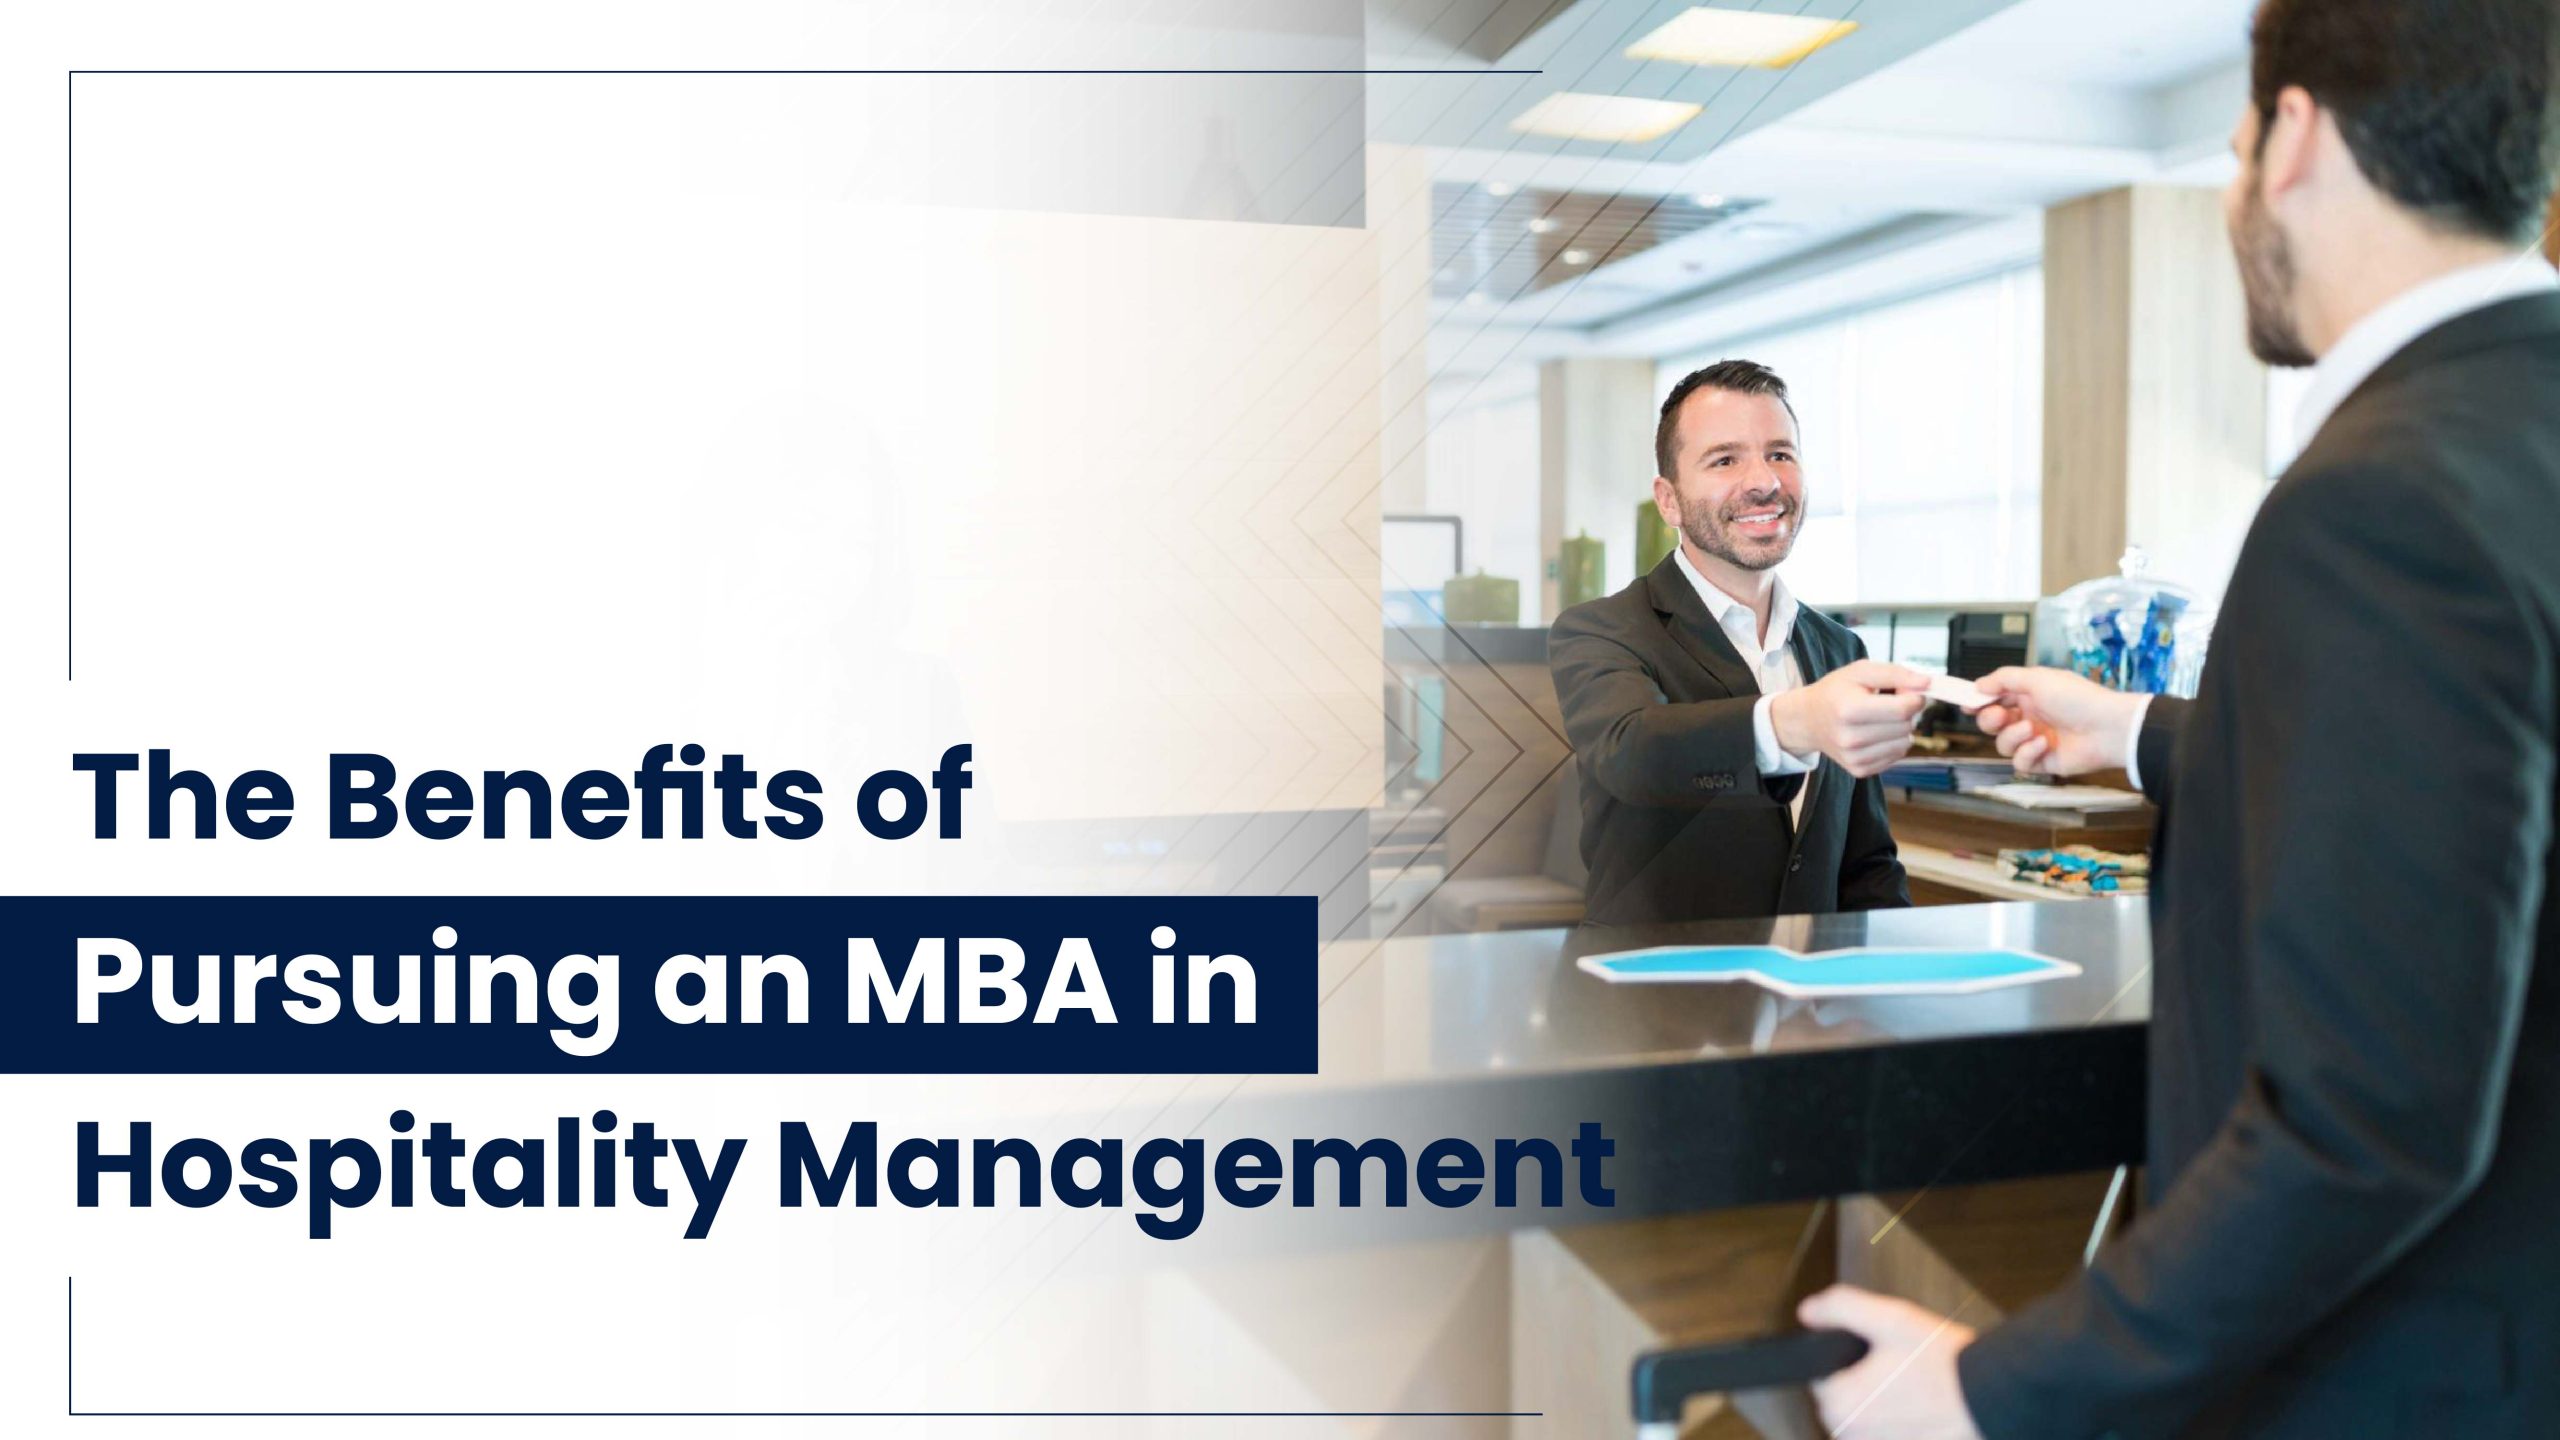 The Benefits of Pursuing an MBA in Hospitality Management